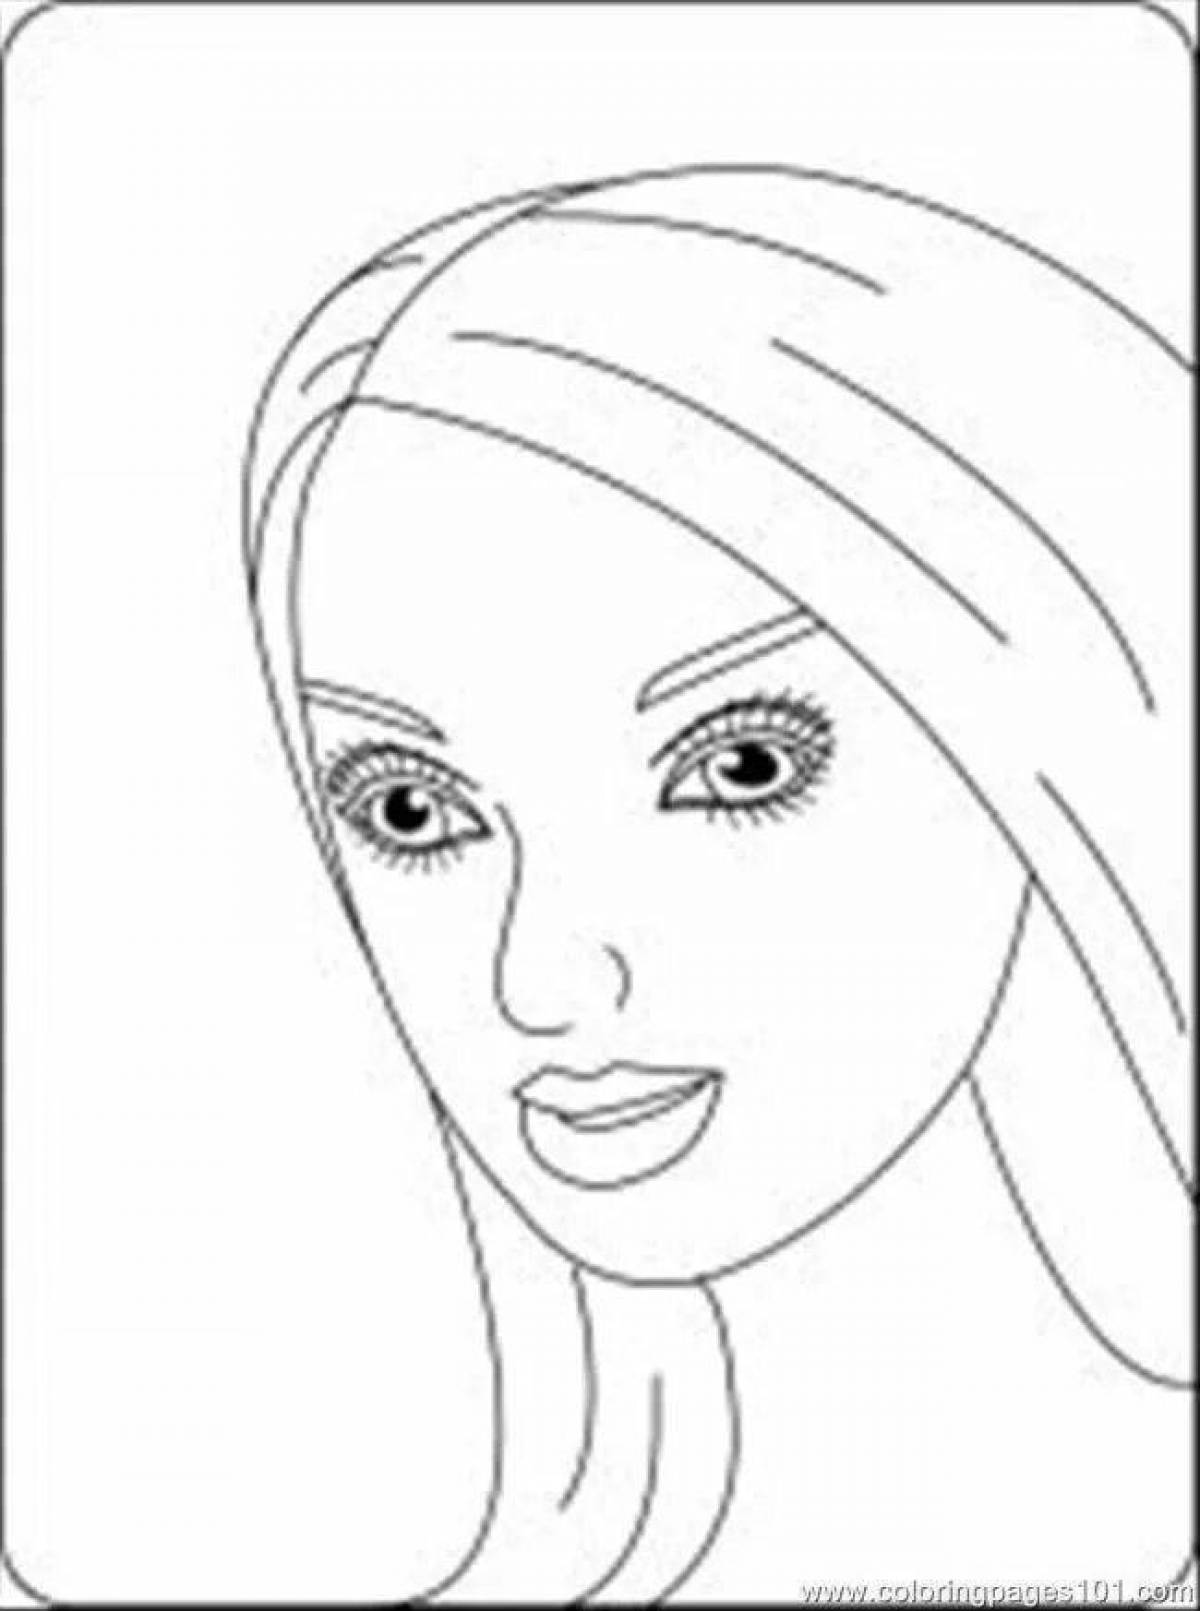 Barbie glowing face coloring book